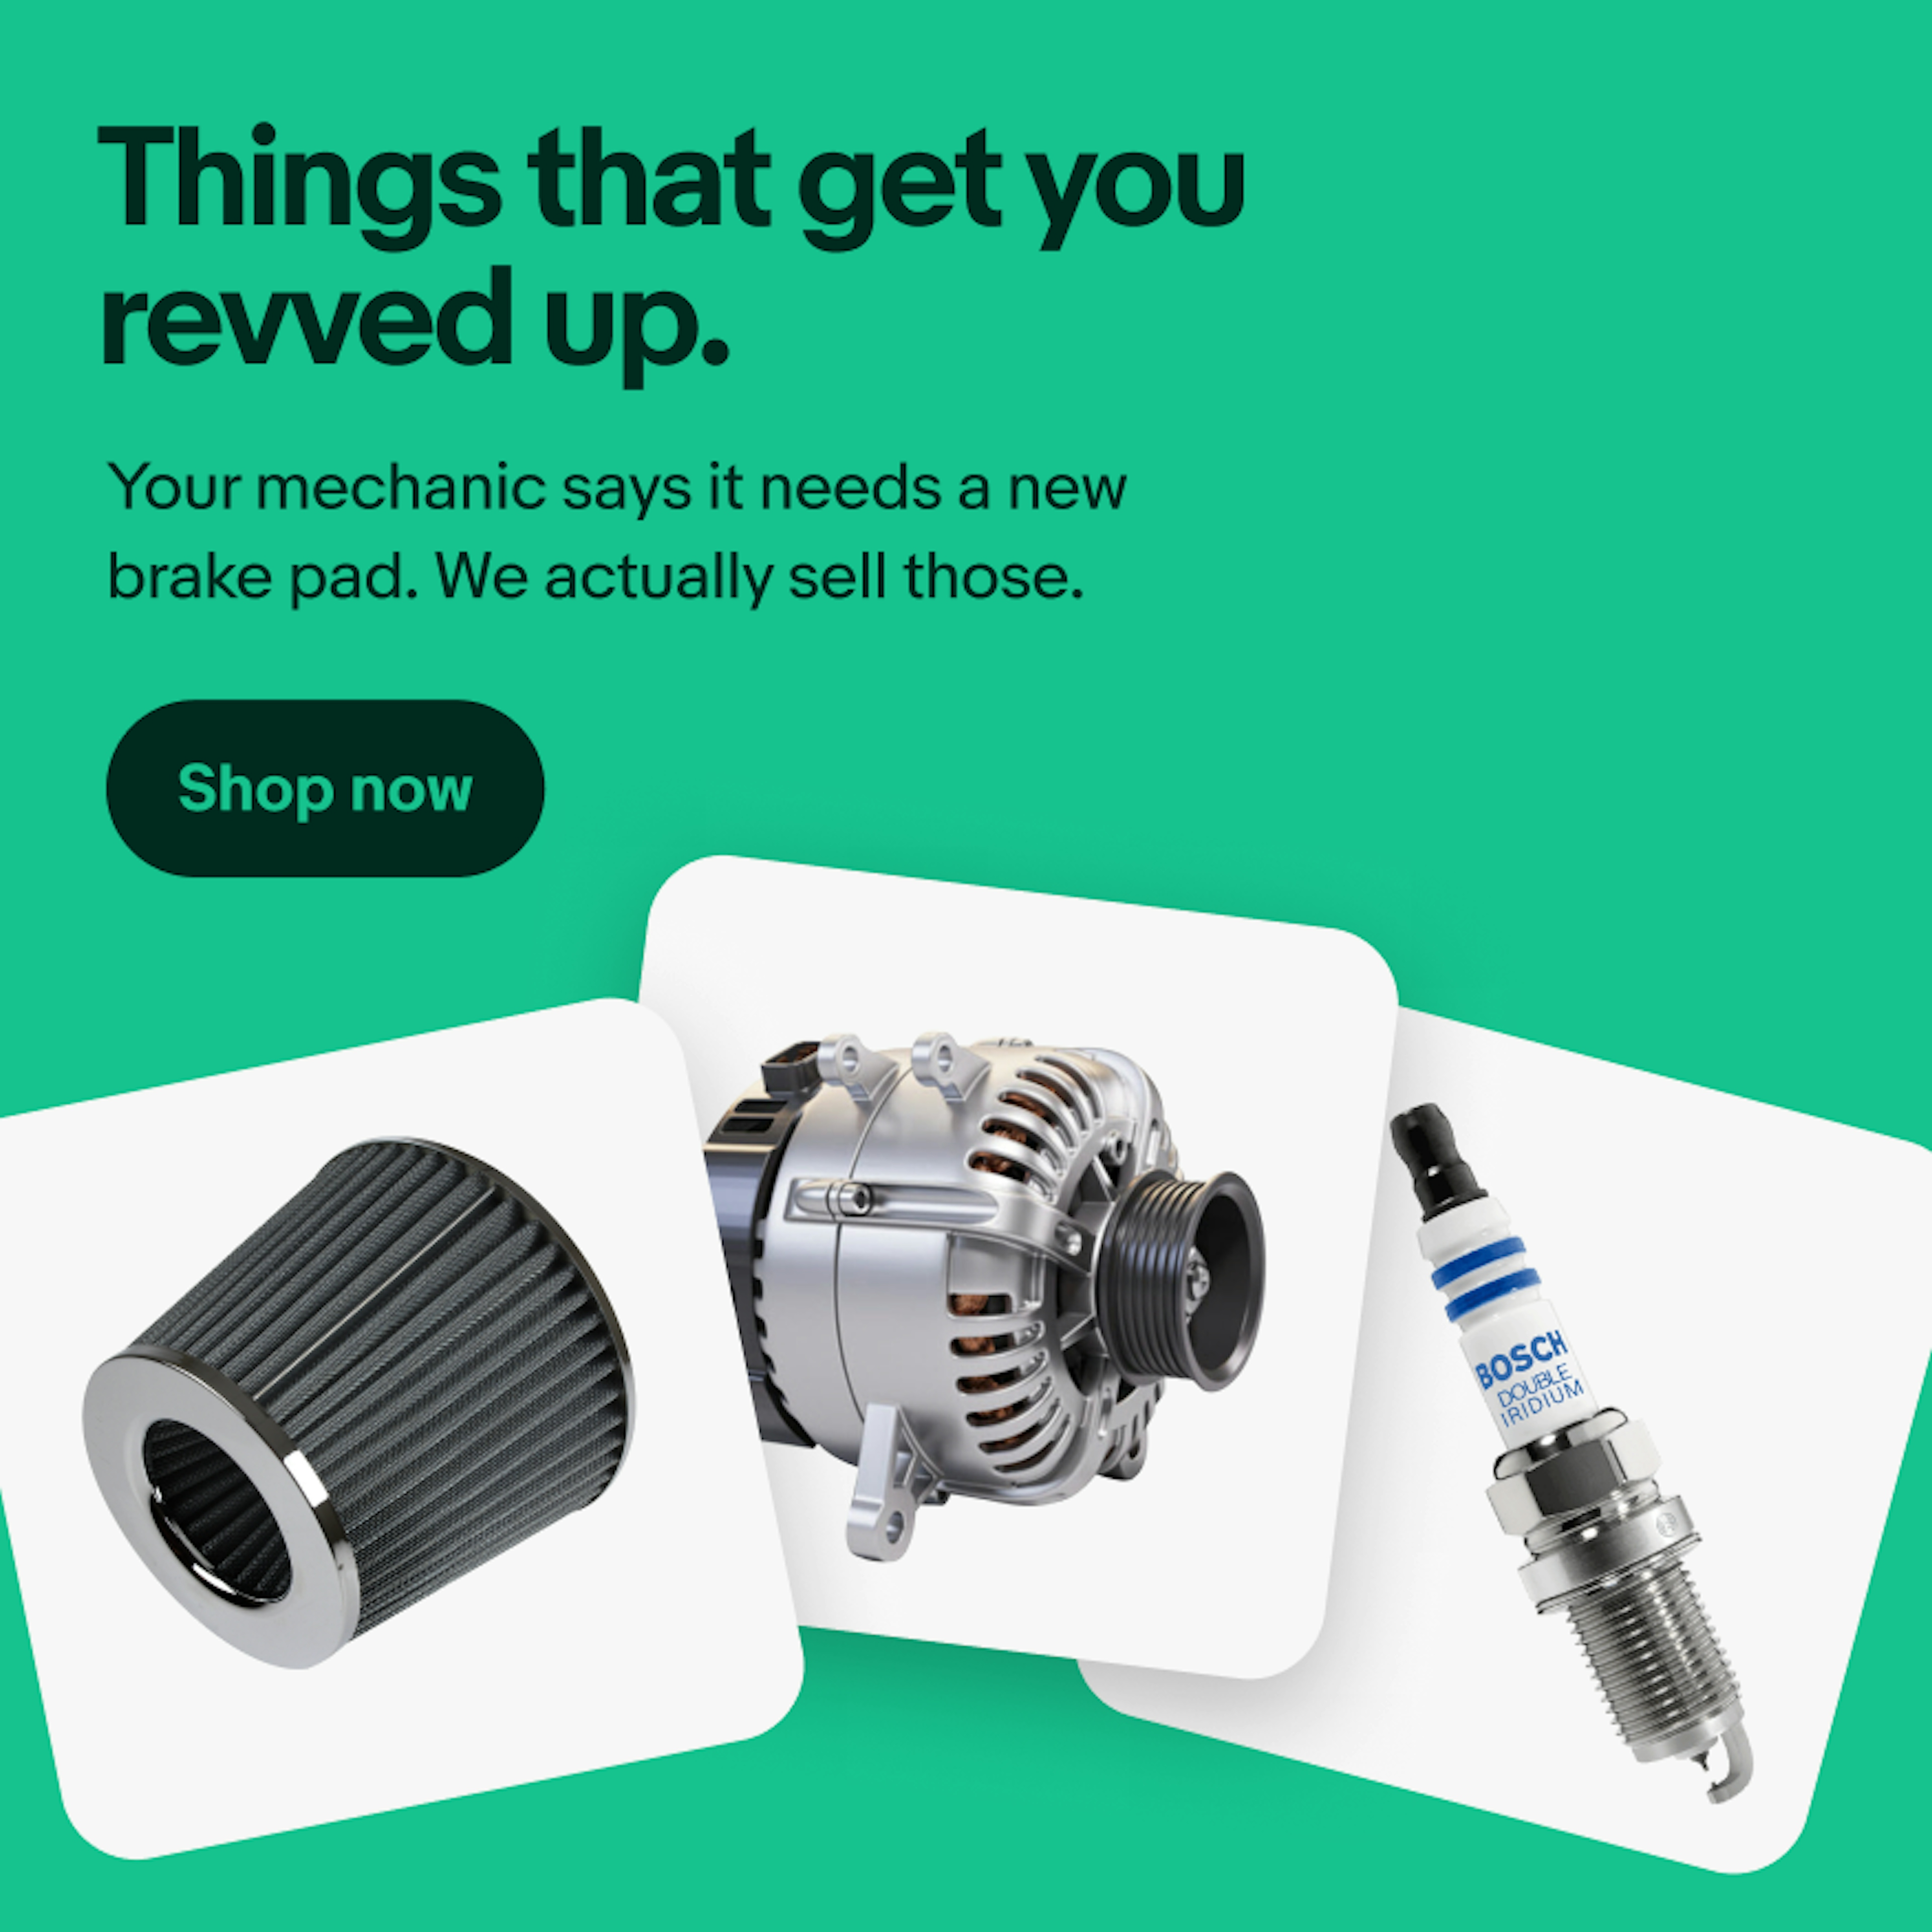 Promotional banner featuring the text "Things that get you revved up" and images of automotive parts such as a filter, alternator, and spark plug, encouraging viewers to shop for these items.